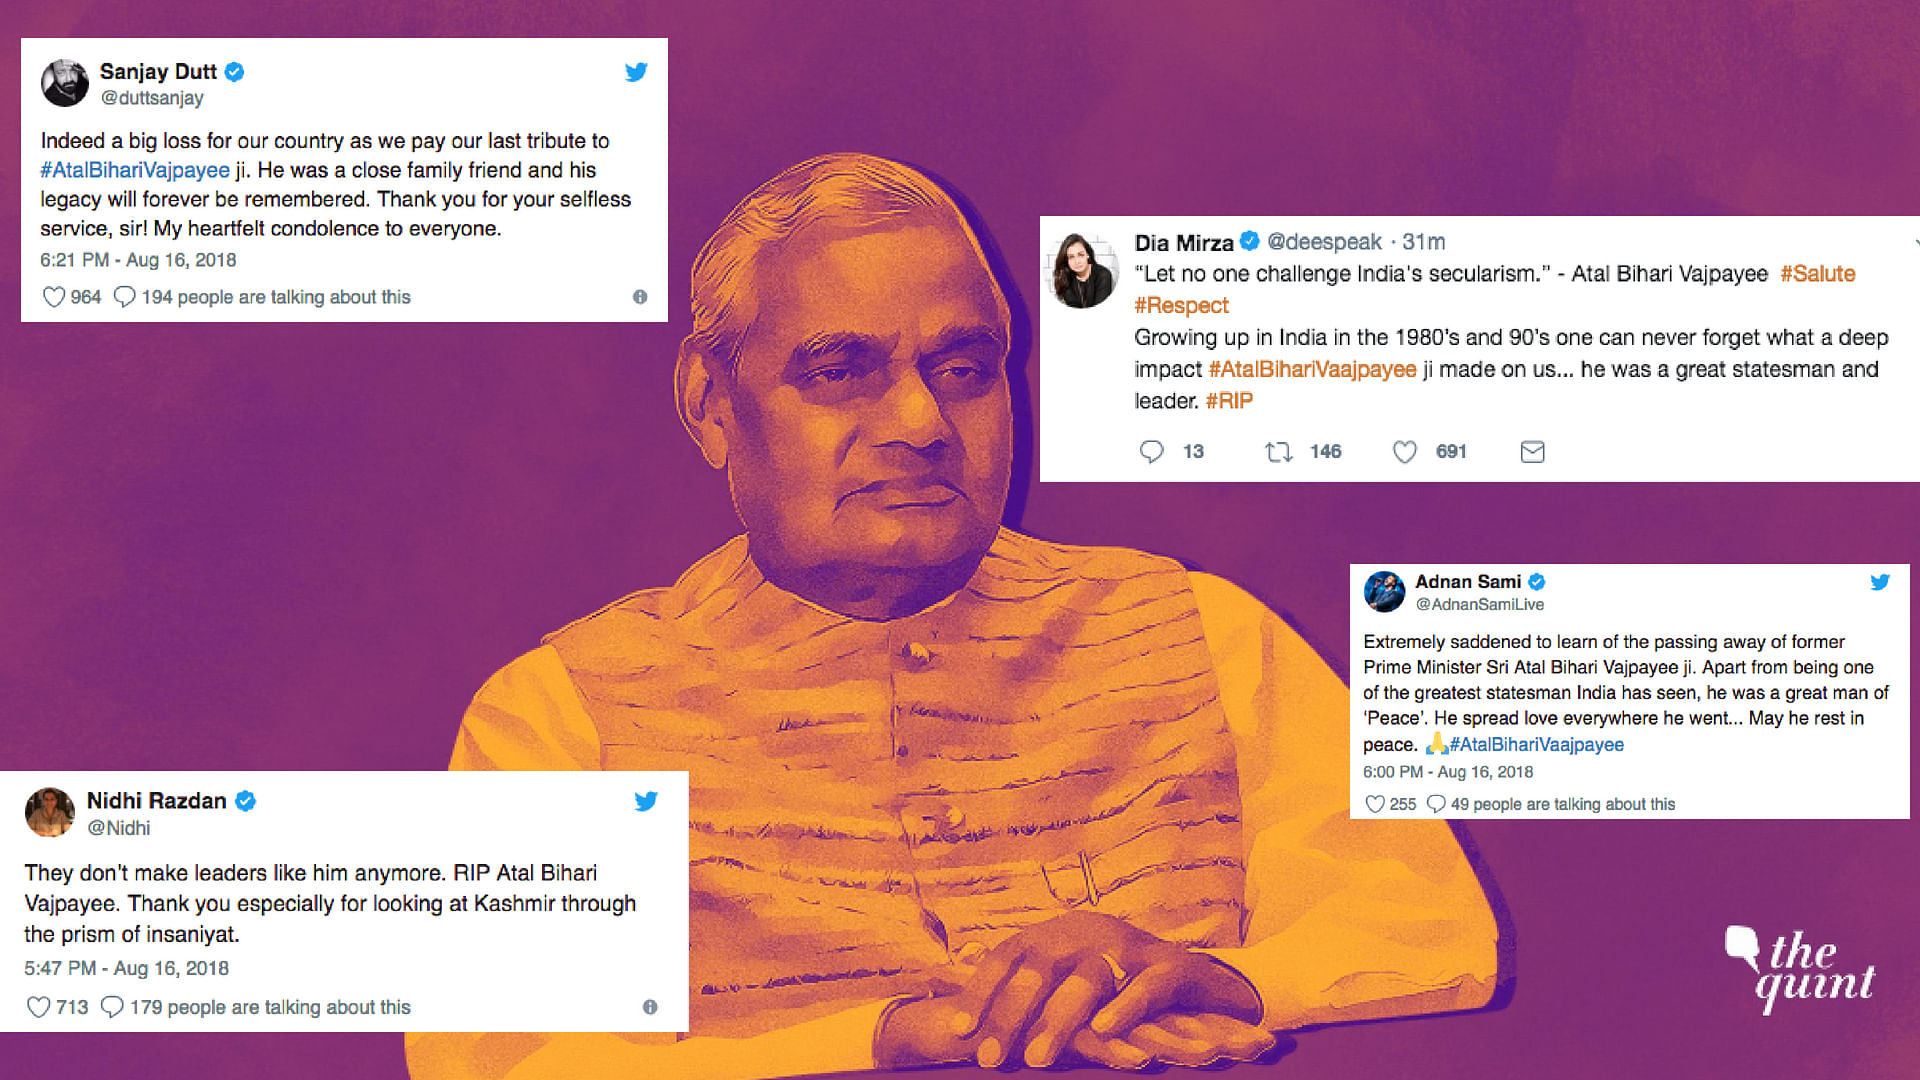 A three-time prime minister, Vajpayee was an unforgettable man who made significant contributions to the society and politics in India.